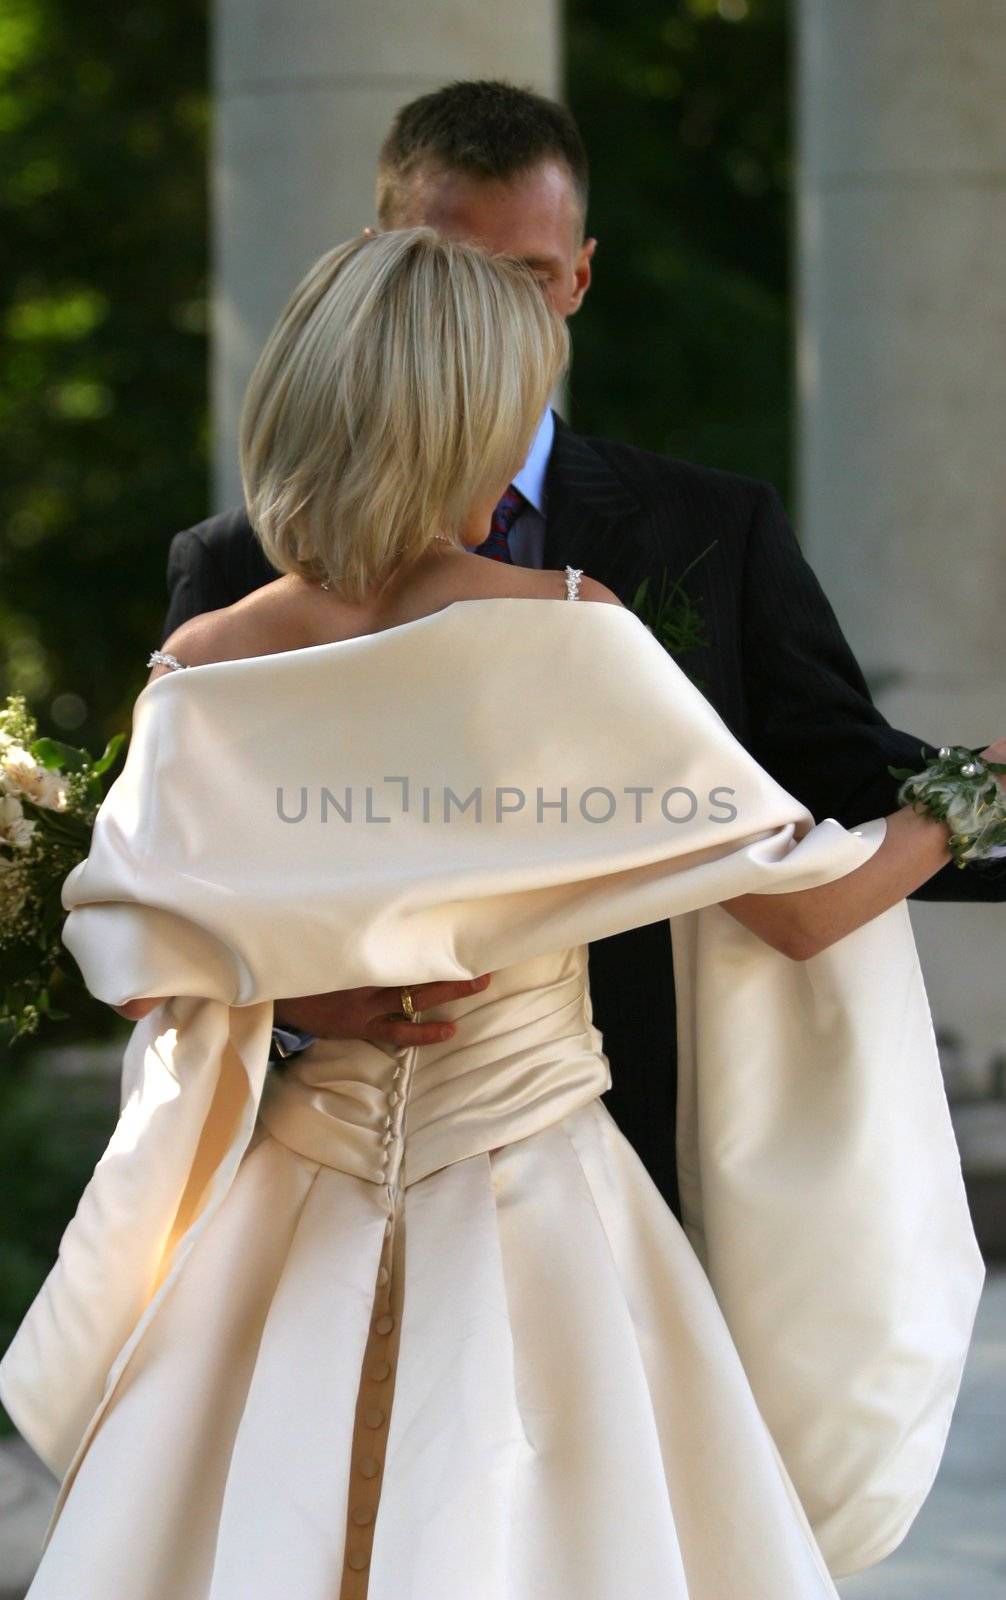 Recently married pair in embraces each other